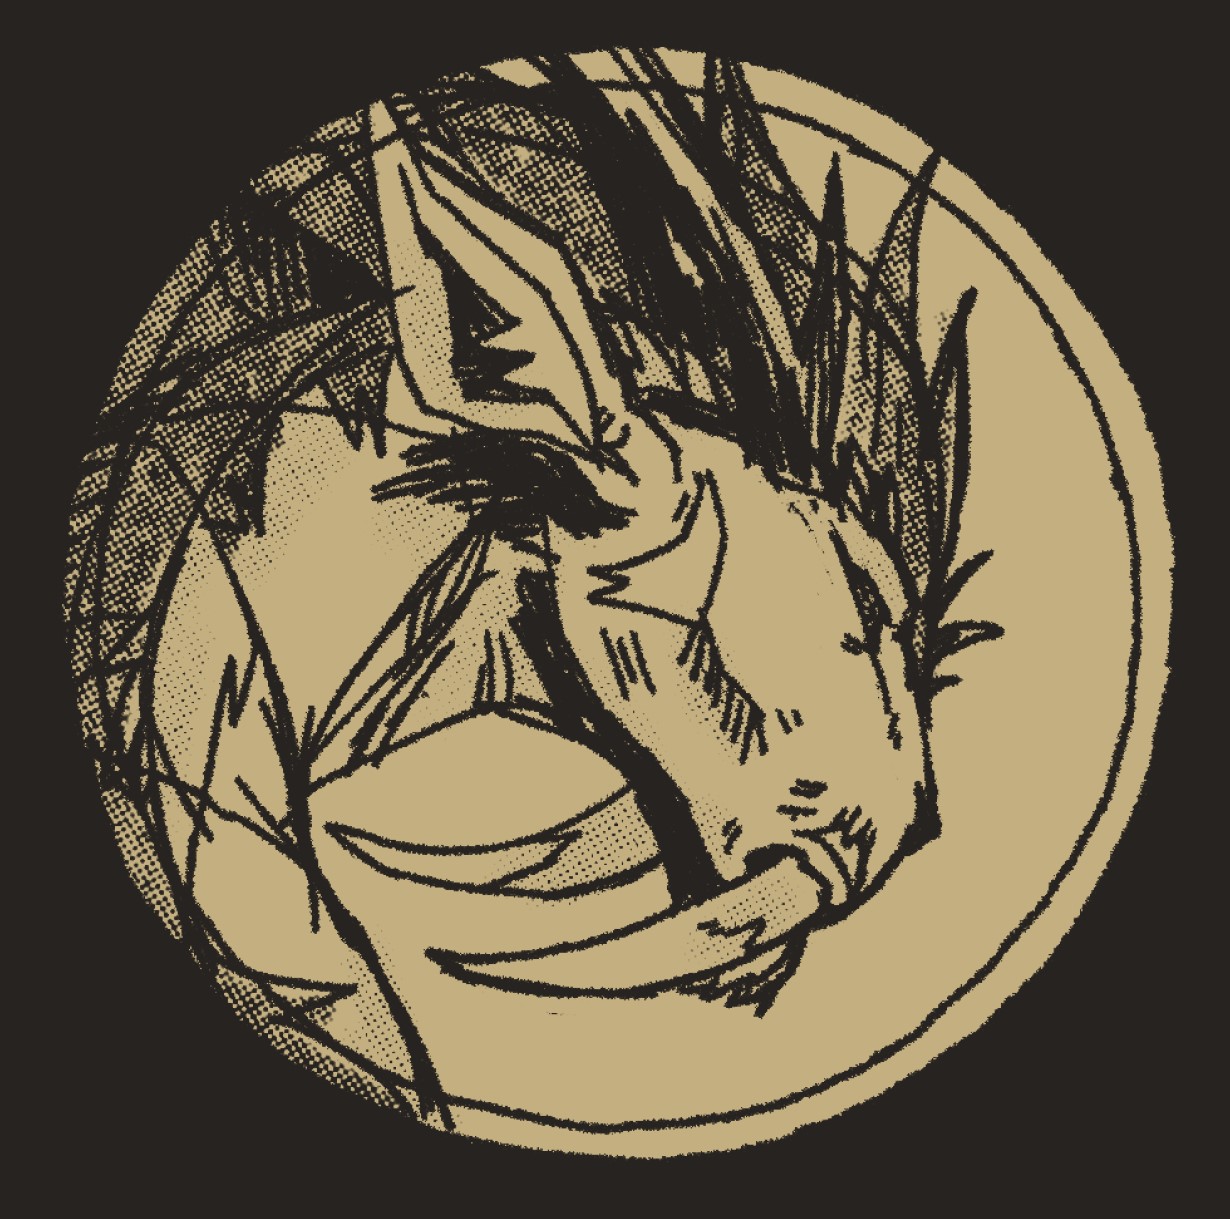 A sketch of the illustration above, which is of the head of a deer-dragon-like being with saber teeth.